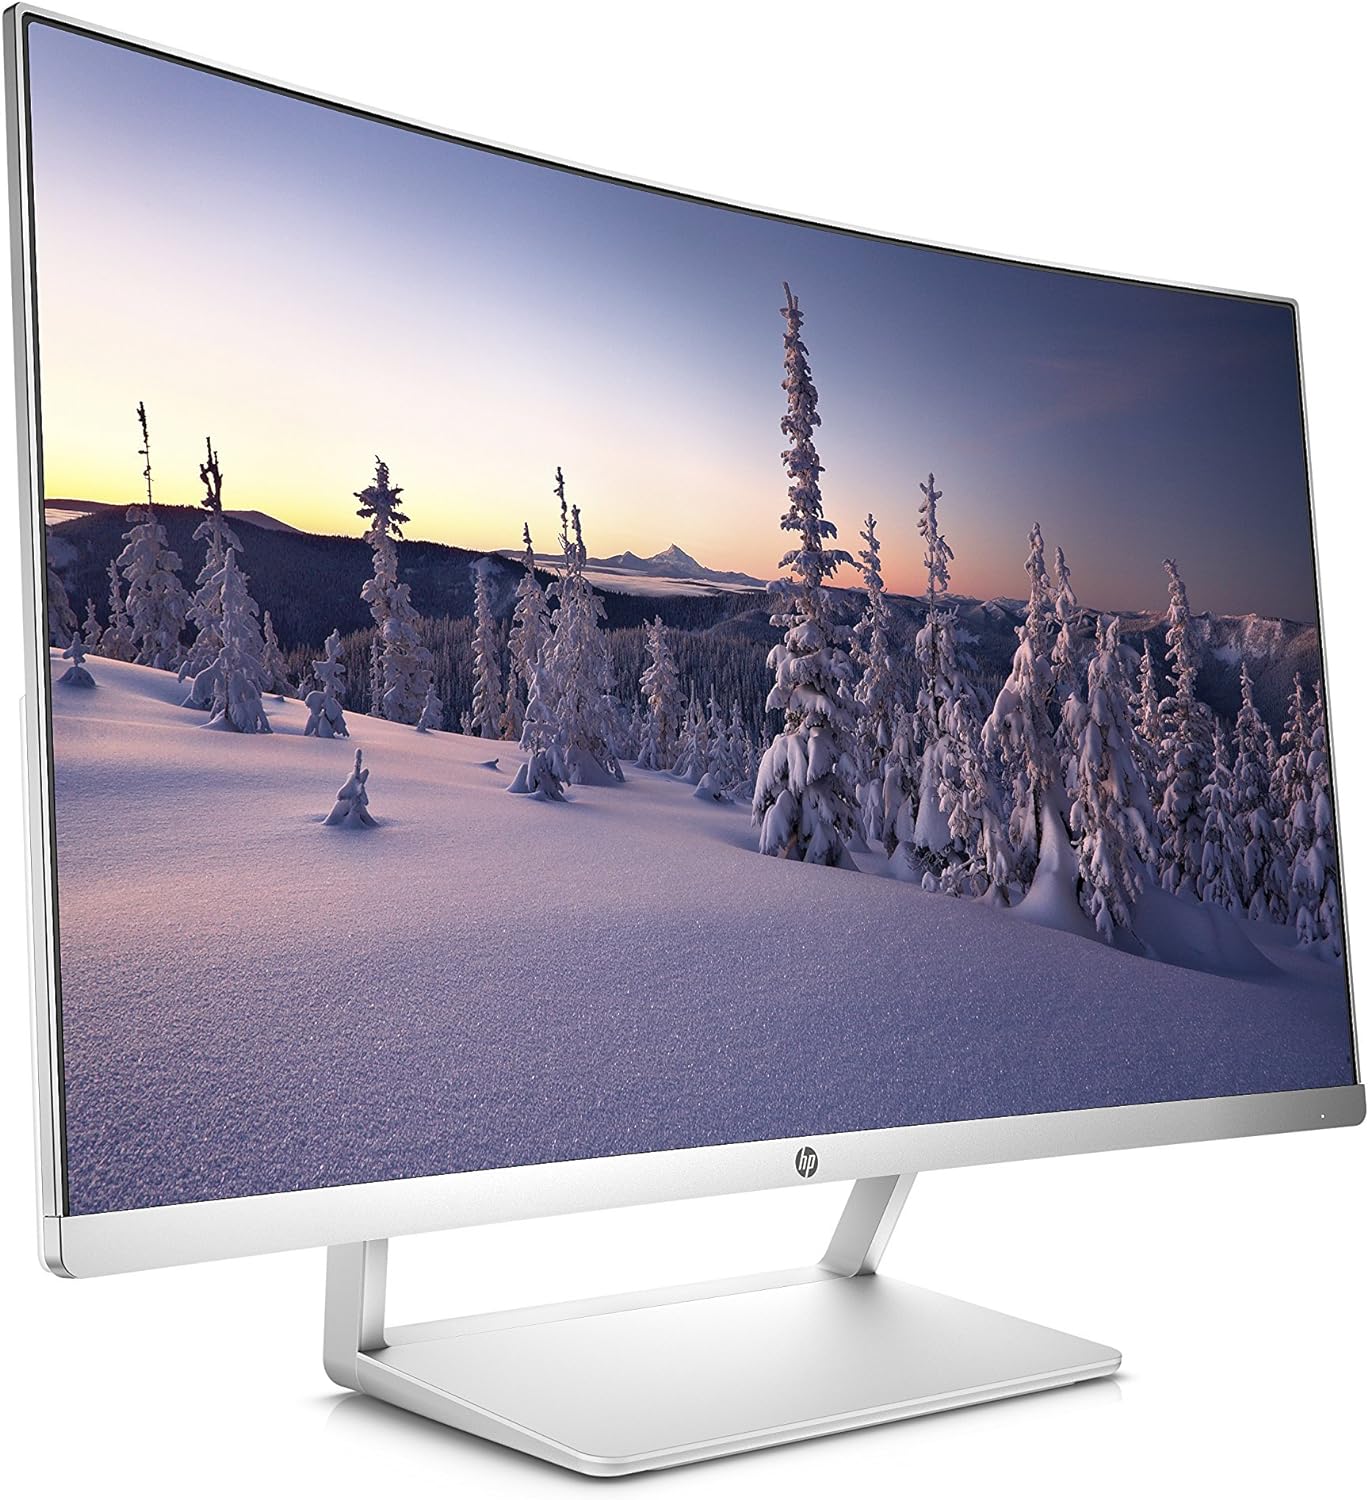 HP Z4N74AA#ABA_R 27" 5ms HDMI Widescreen LED Backlight LCD/LED Curved Monitor, White & Silver - Refurbished